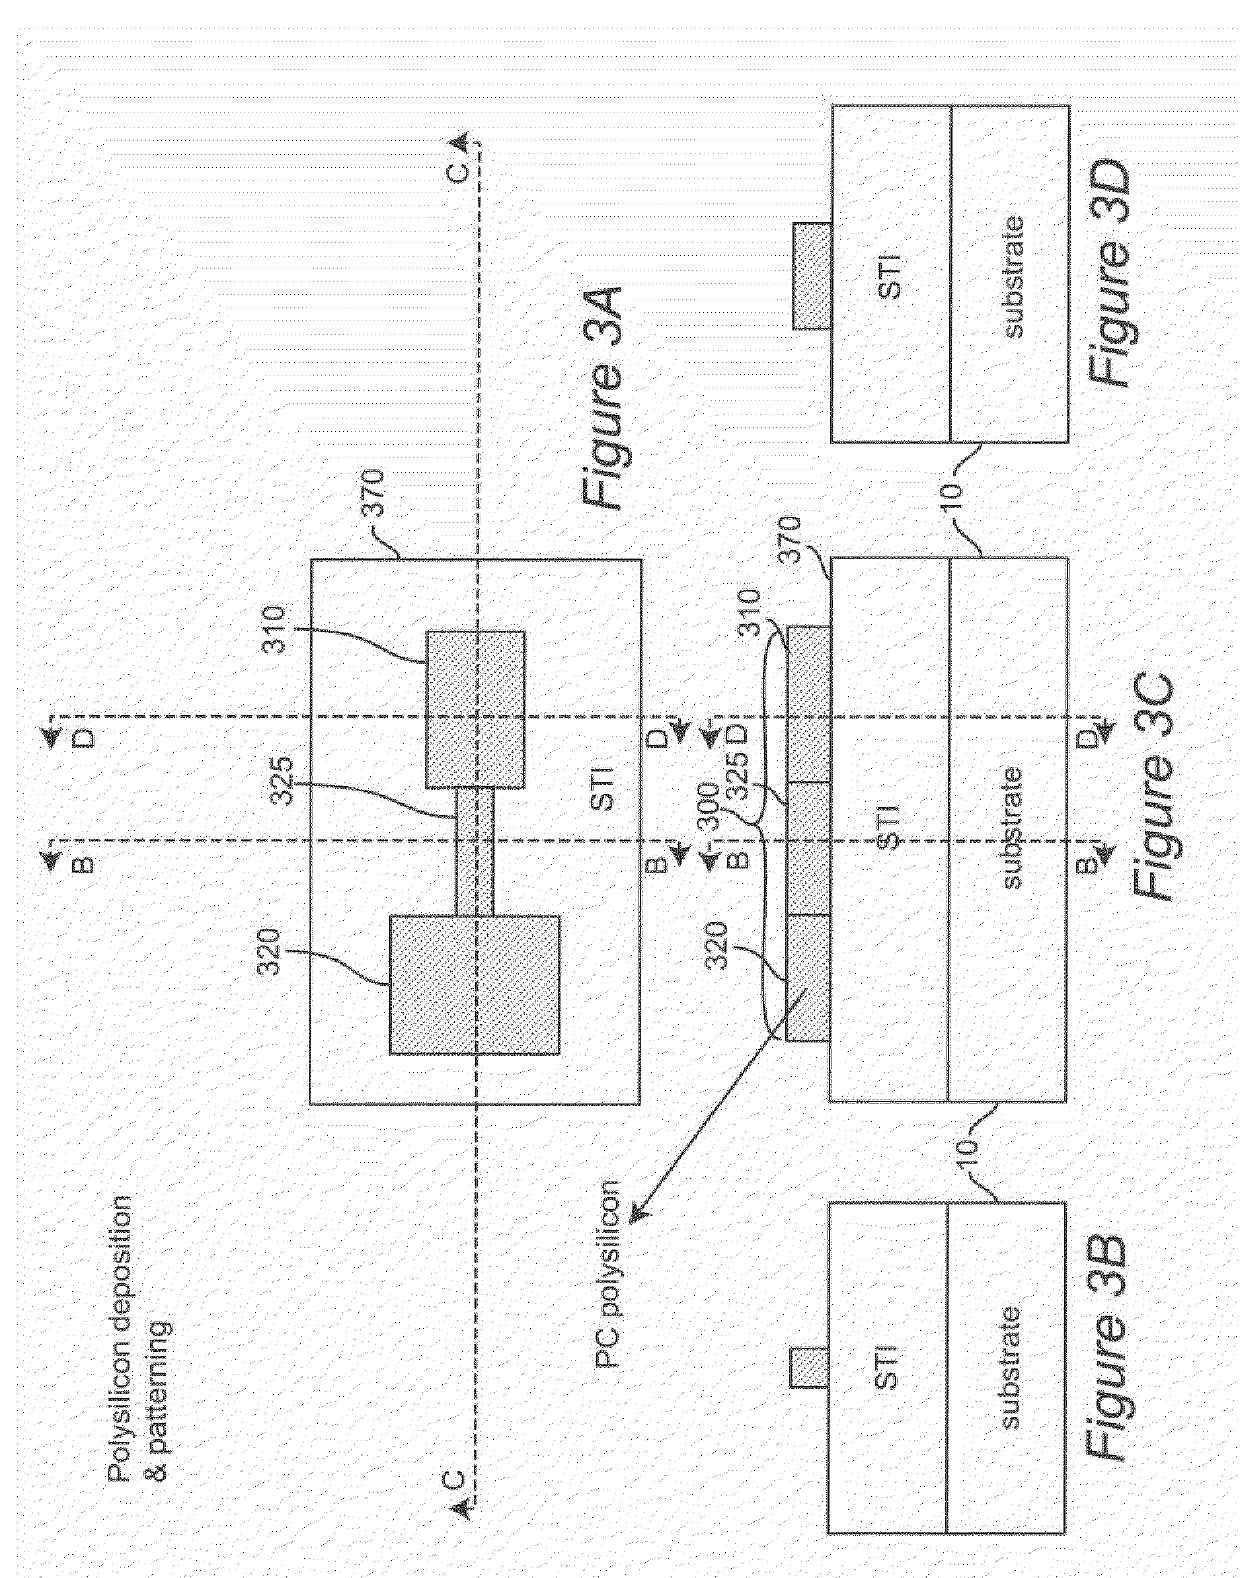 Electrical Antifuse and Method of Programming